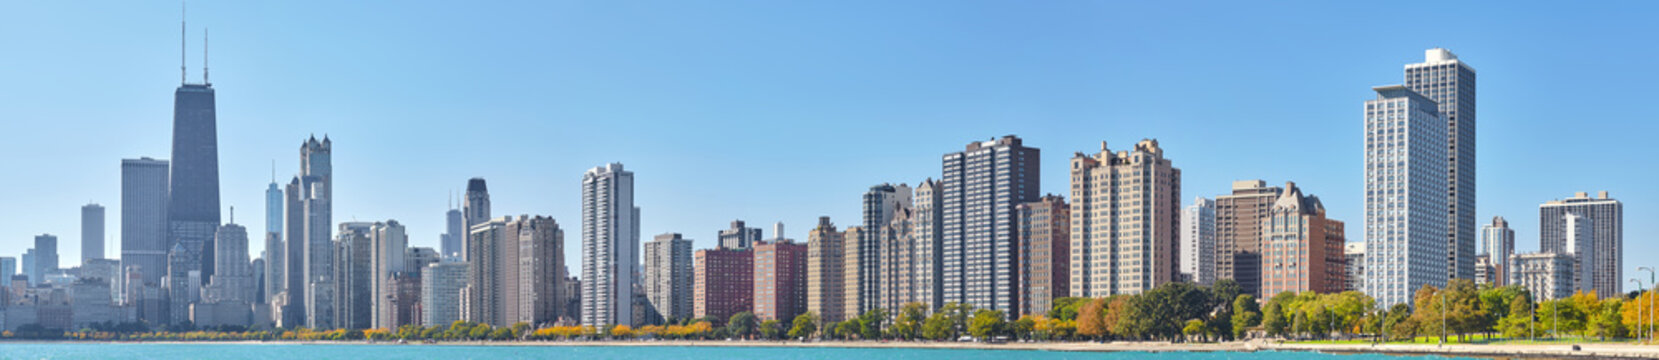 High quality panoramic picture of Chicago waterfront skyline, Illinois, USA.